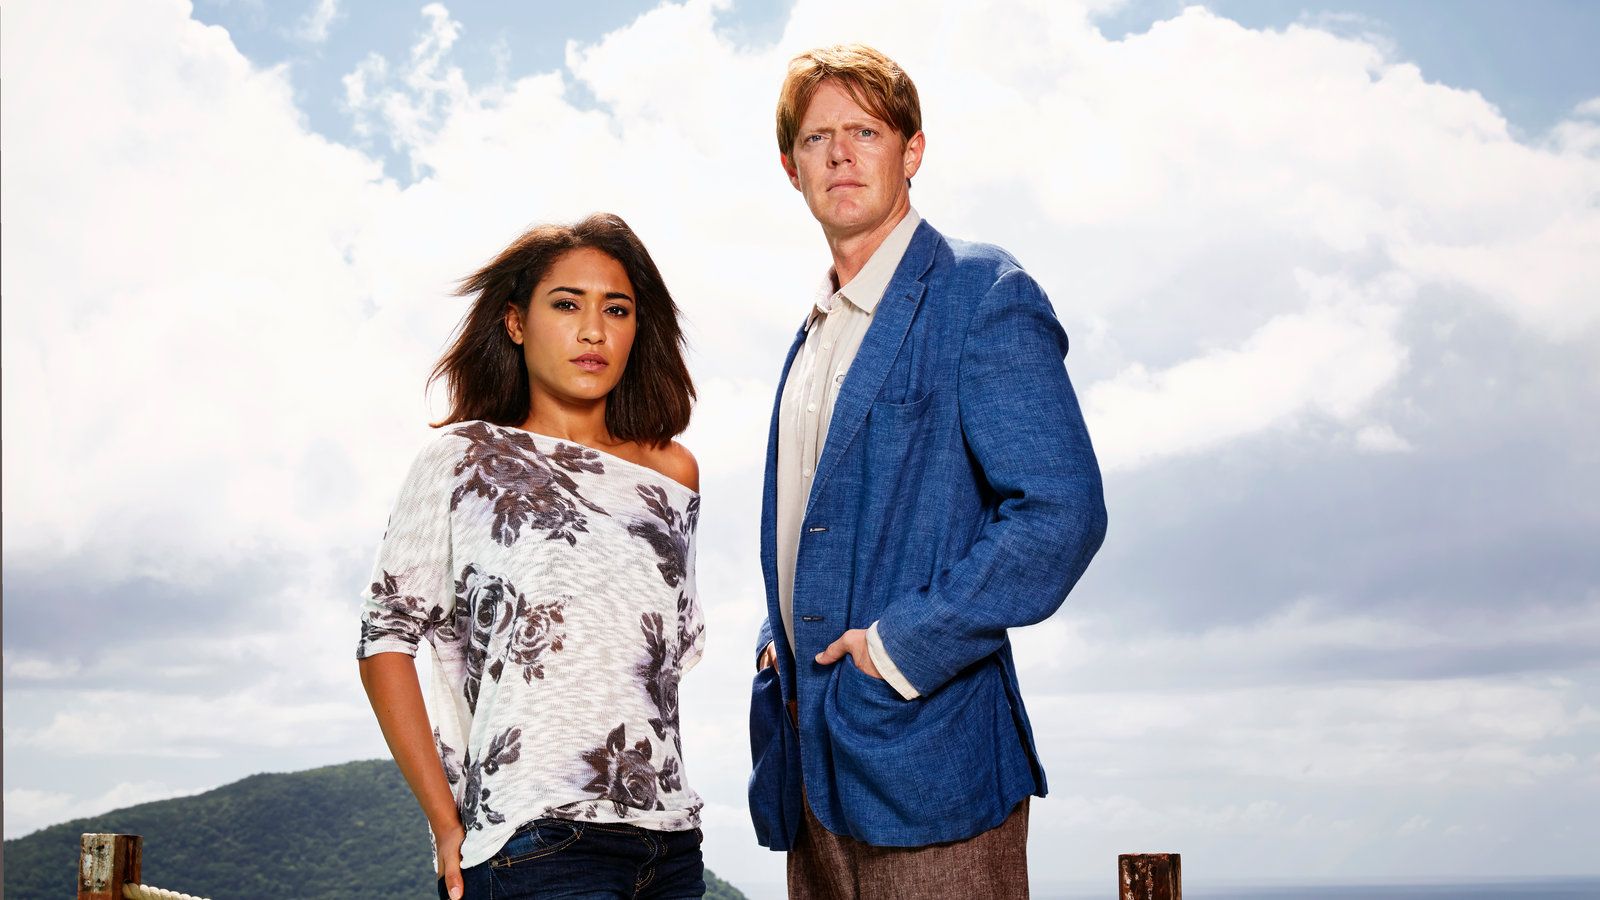 Camille Death In Paradise Cast